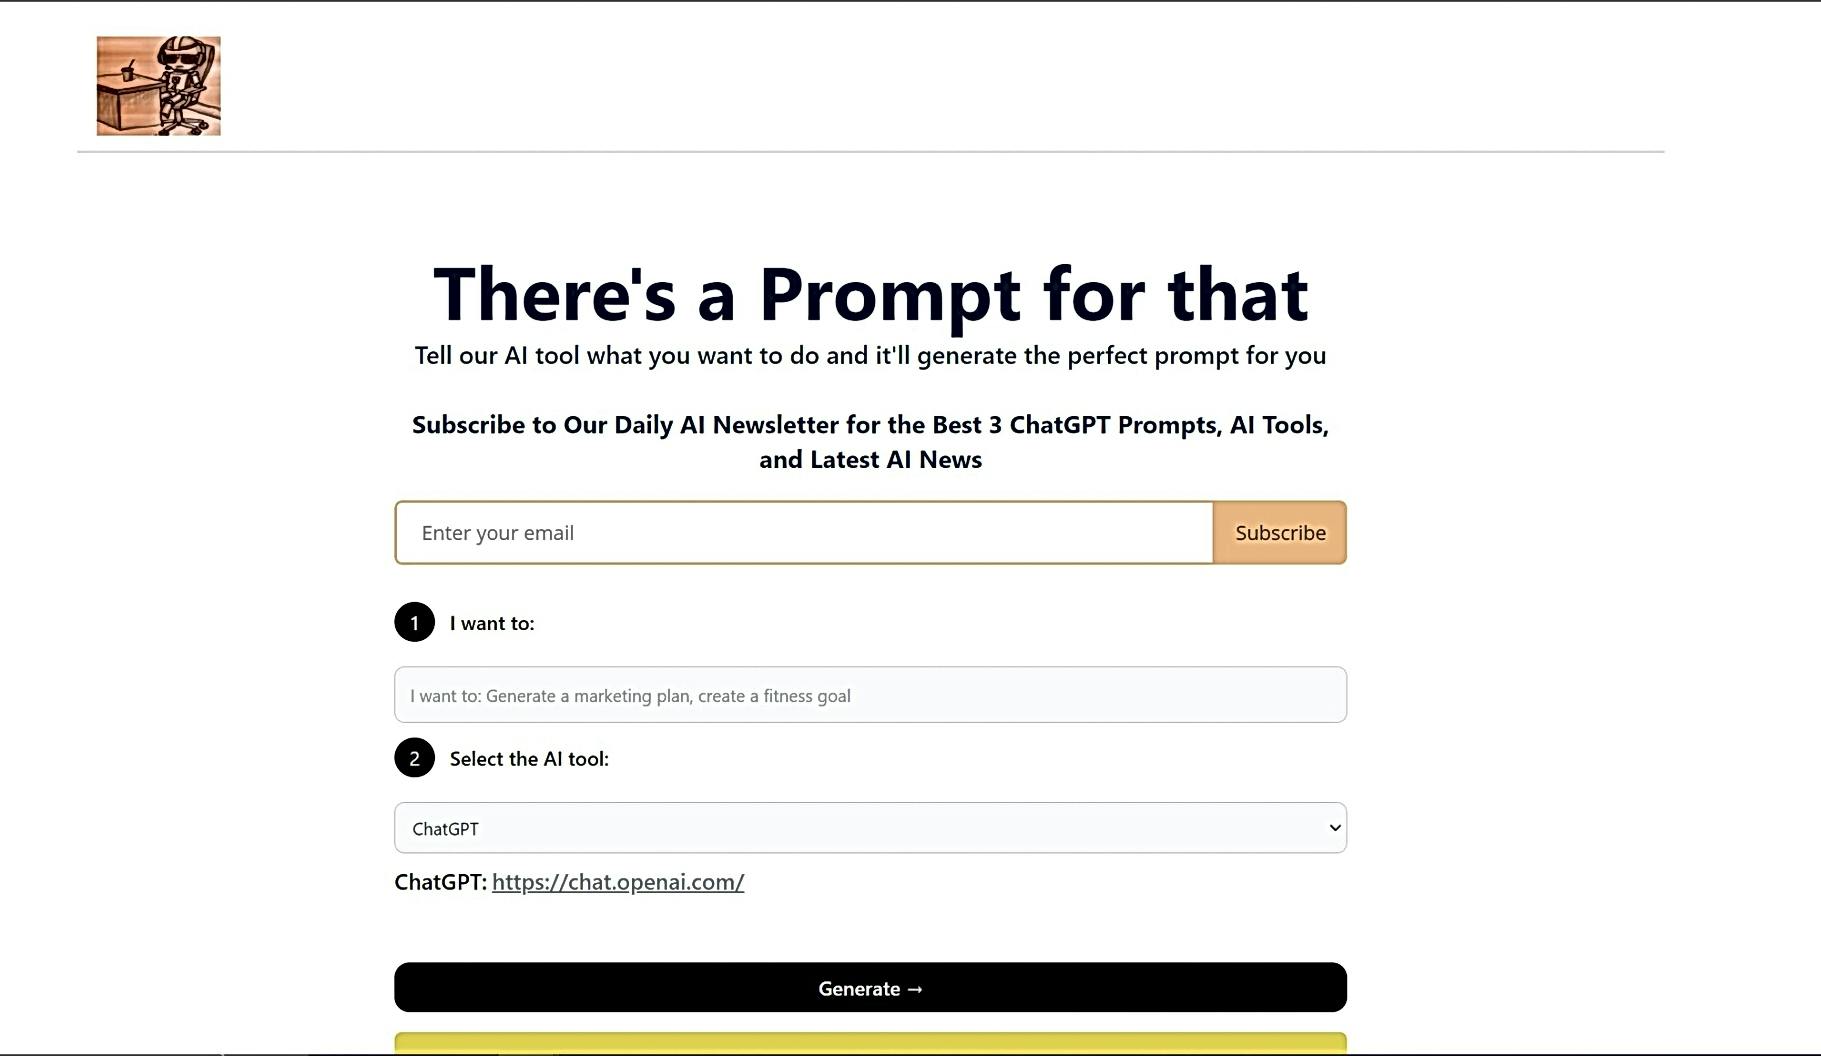 There's a Prompt for that featured